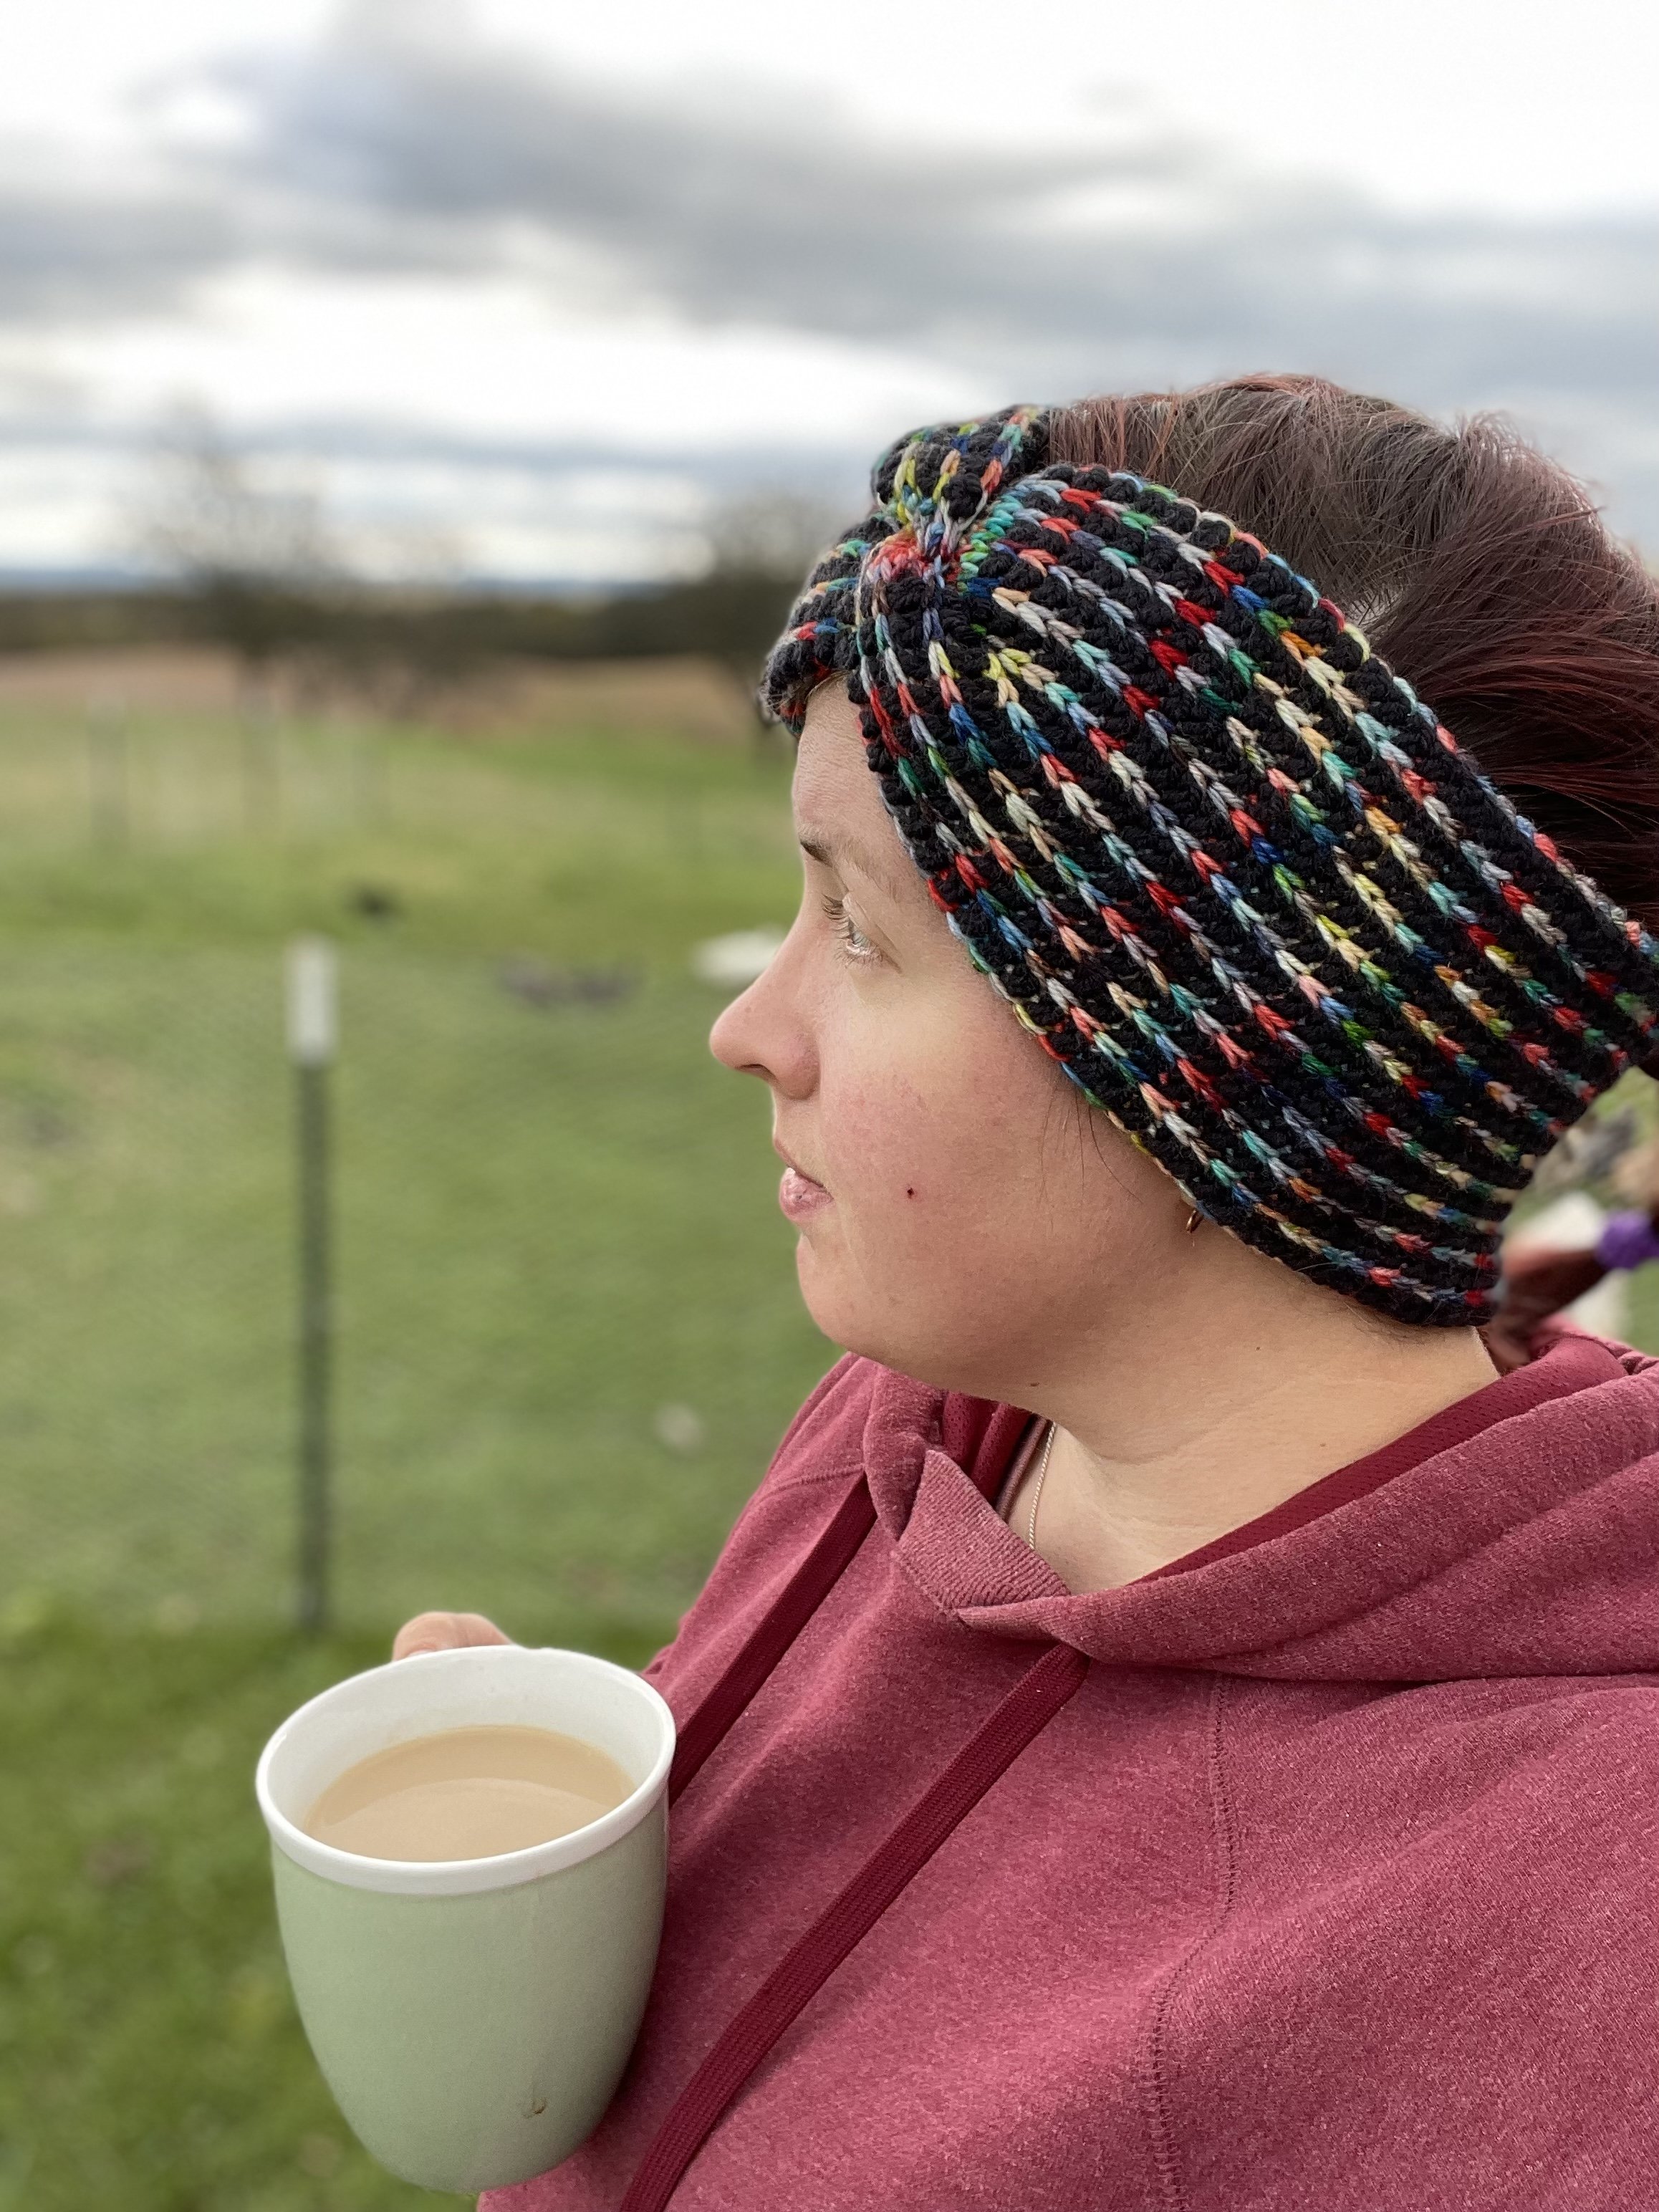 Ruth gazes peacefully off into the distance while wearing the Medusa Earwarmer. It is an alternating black and multi-colored stripe pattern running around the circumference of hear head. The ear warmer meets in a faux-knot over her eye